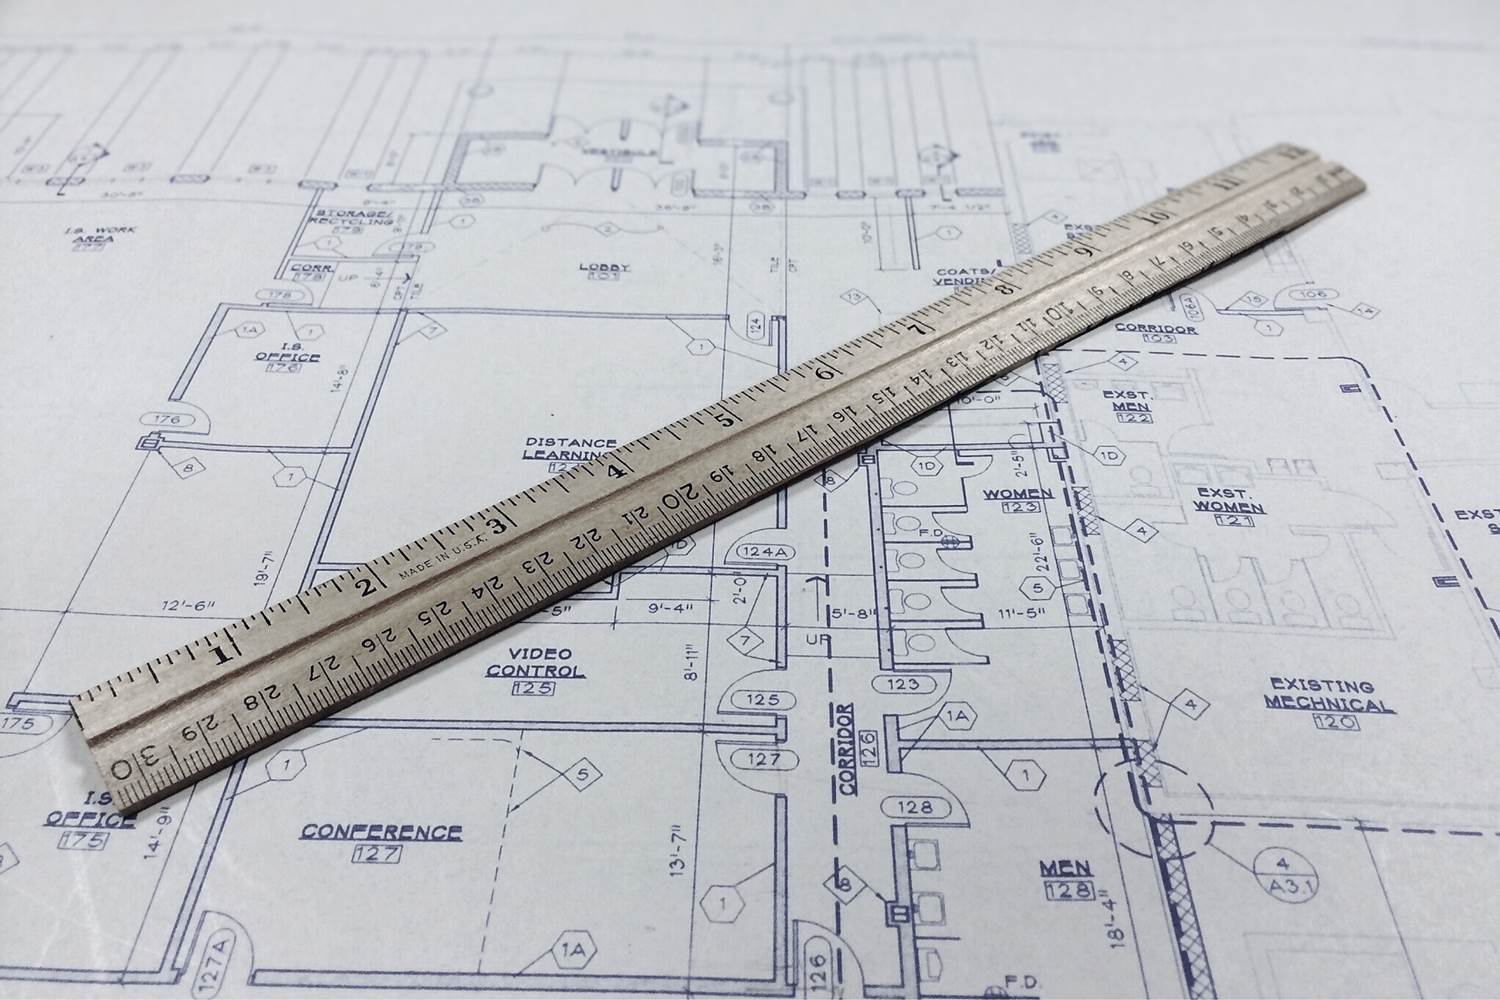 Floor plans with a ruler